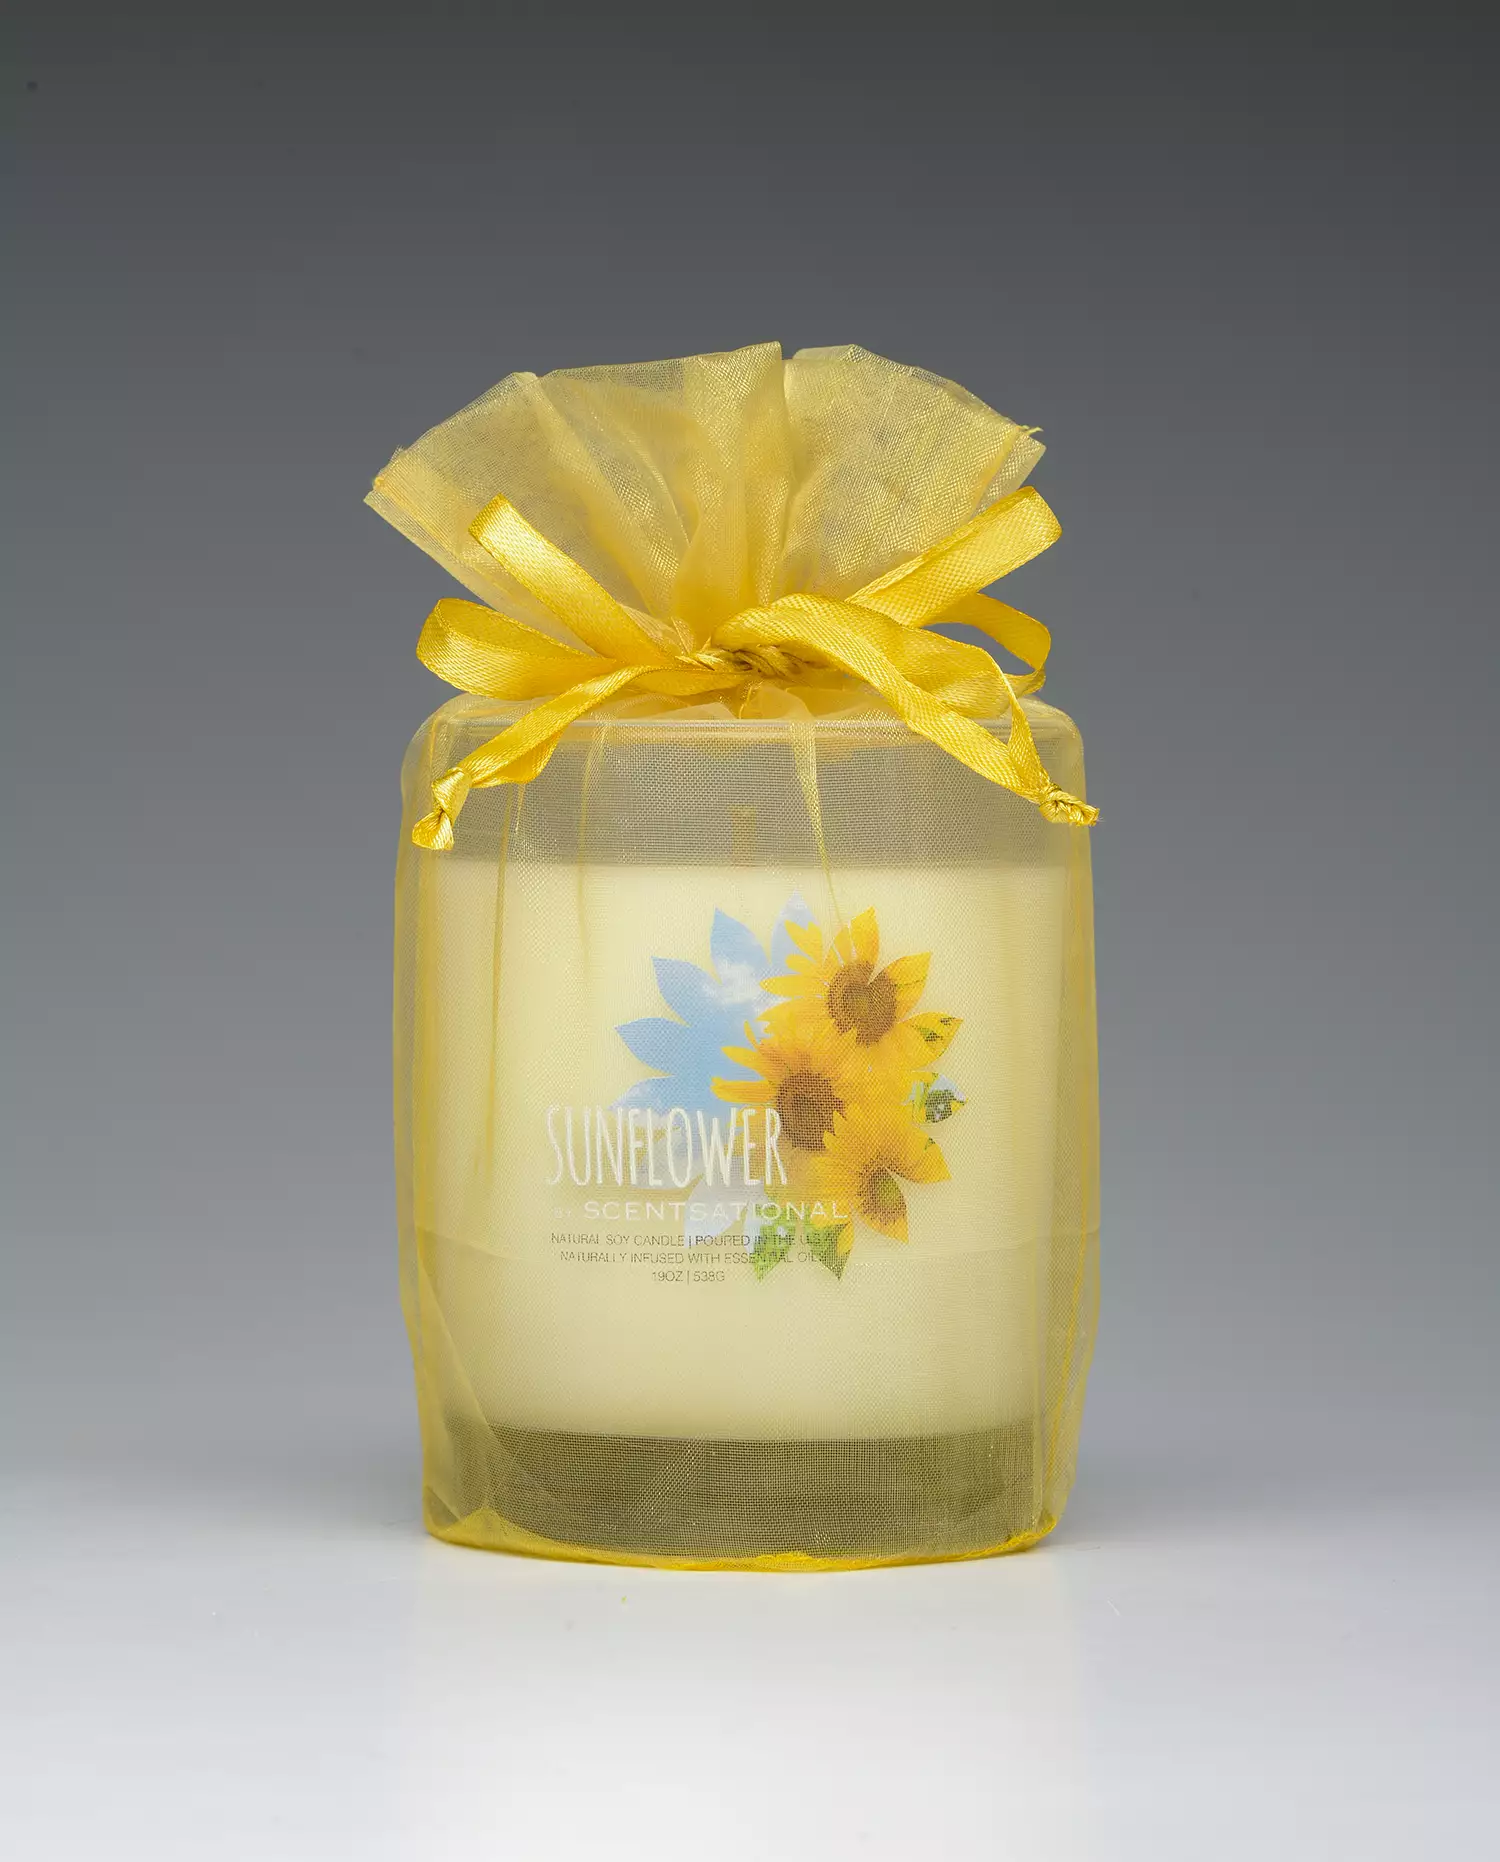 Sunflower - 11oz Scented Candle